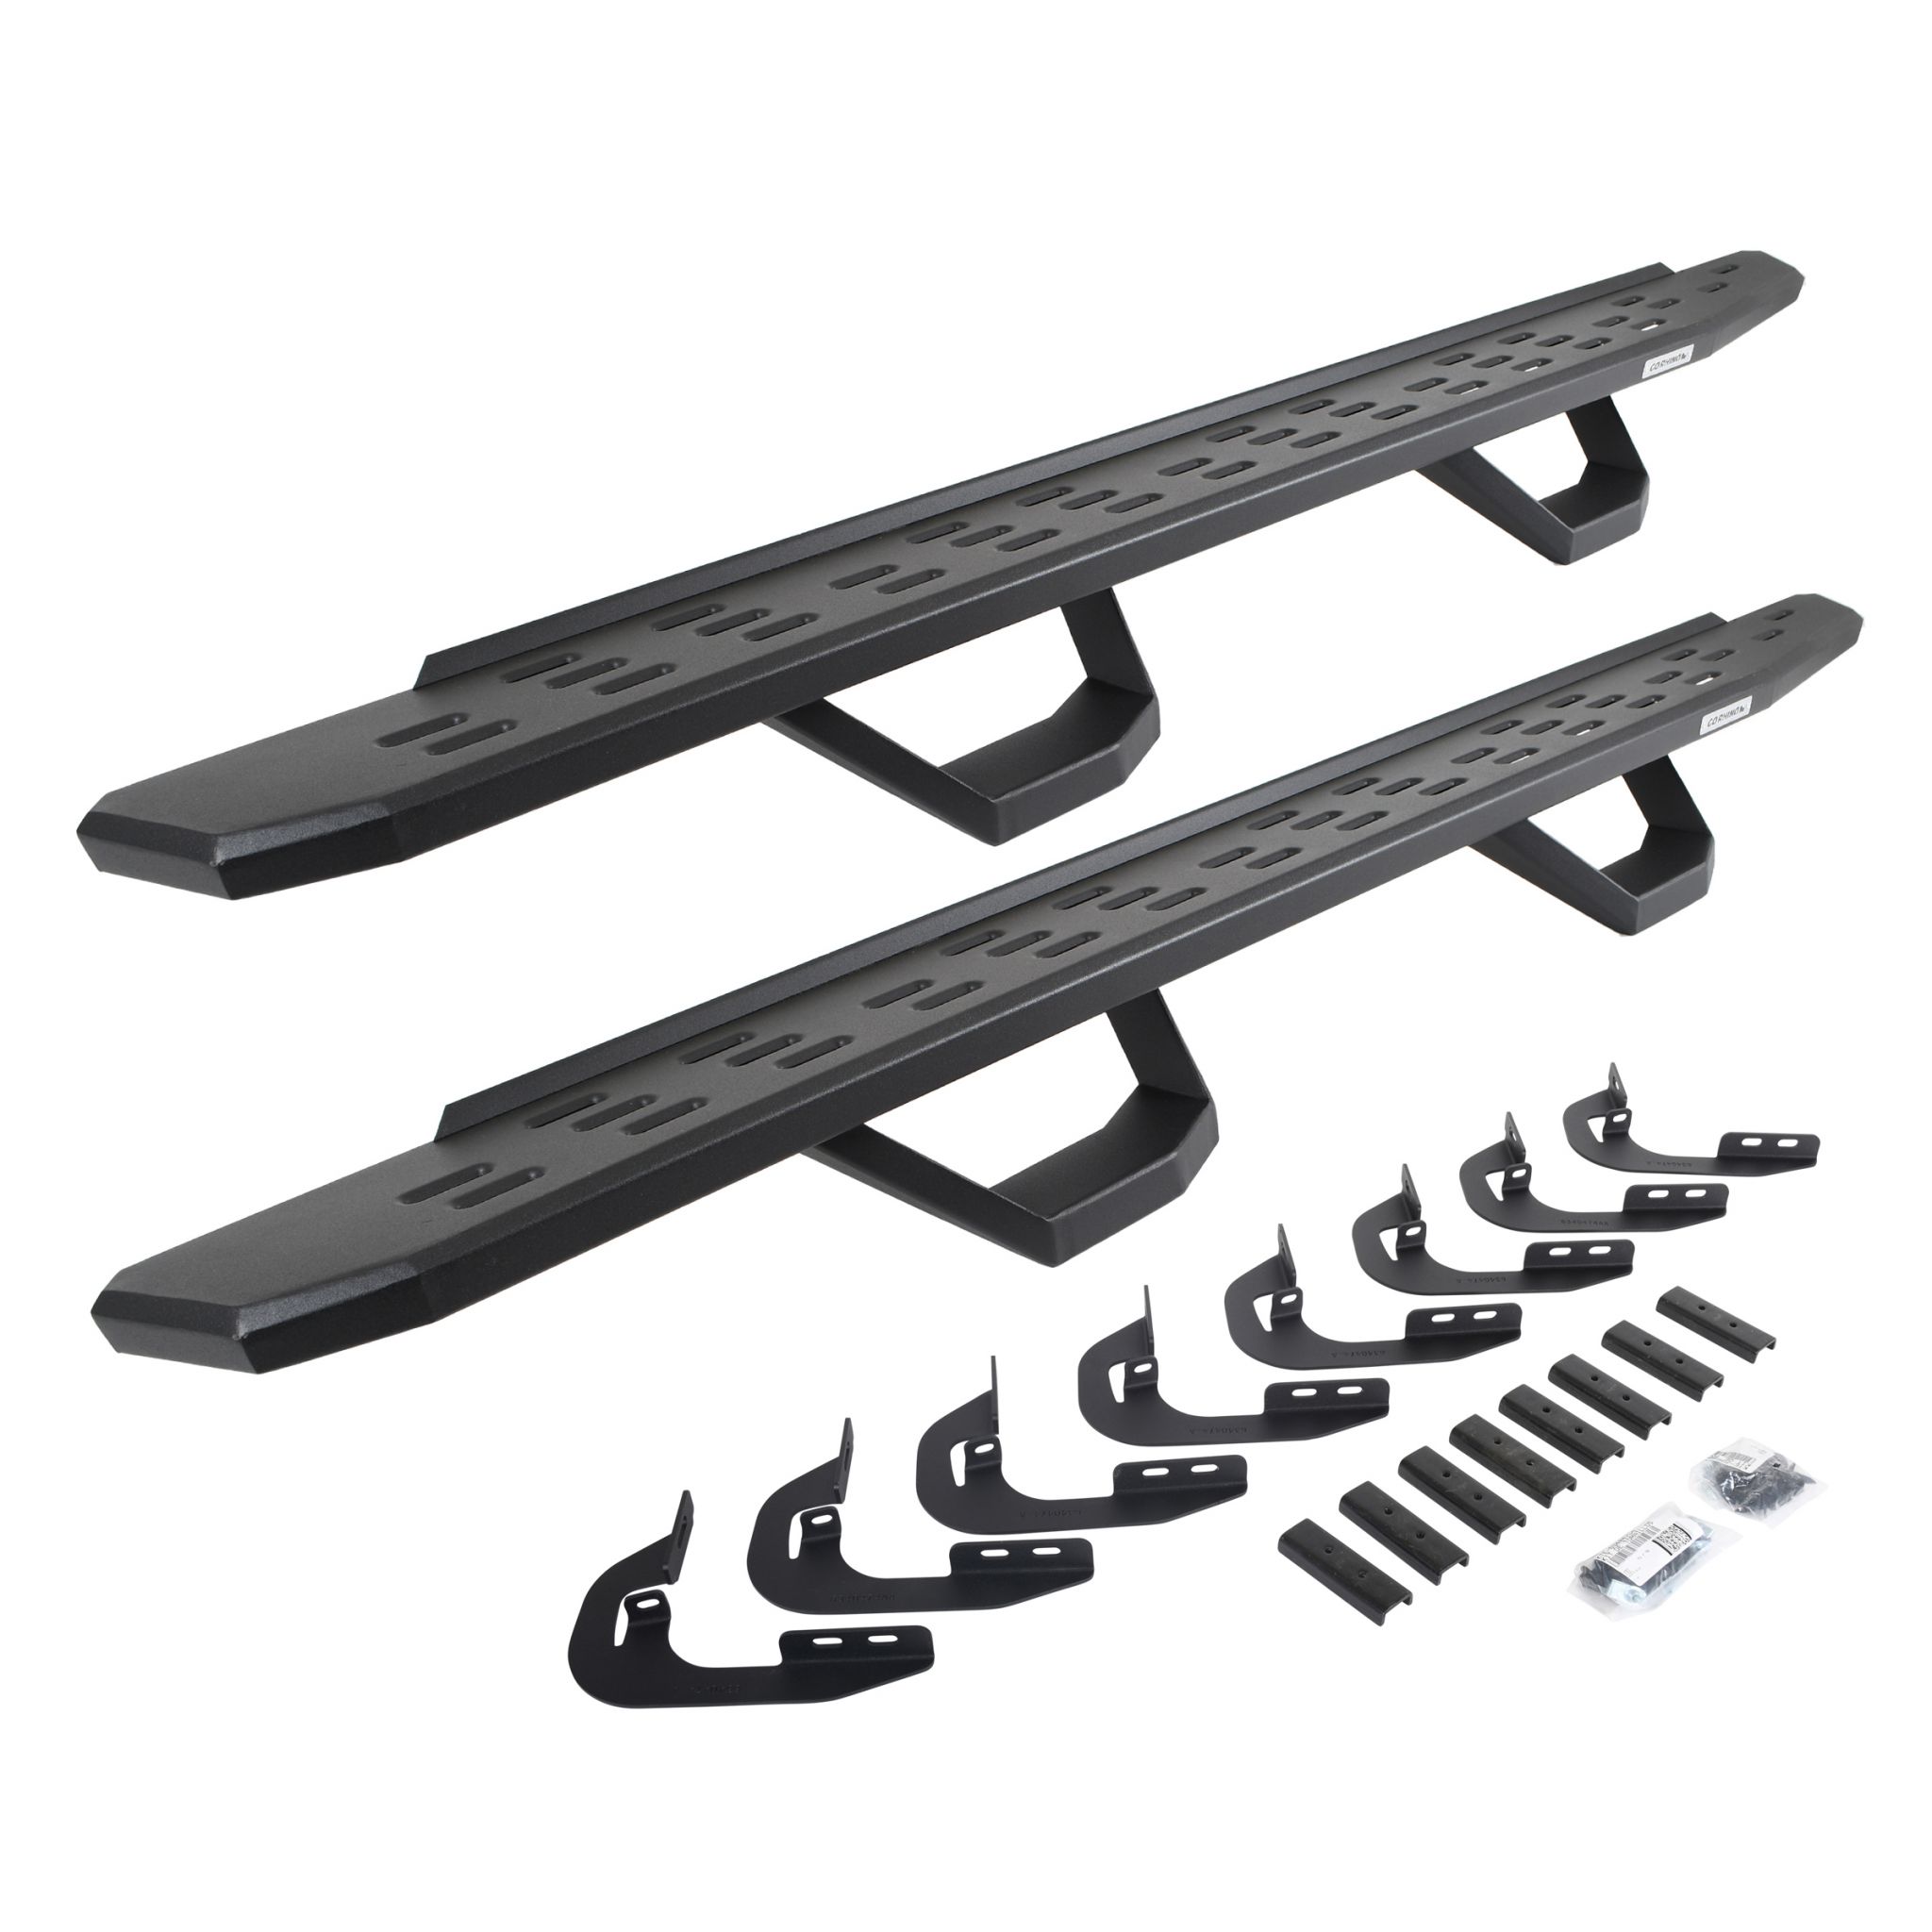 Go Rhino 6960588020PC - RB30 Running Boards with Mounting Brackets & 2 Pairs of Drops Steps Kit - Textured Black